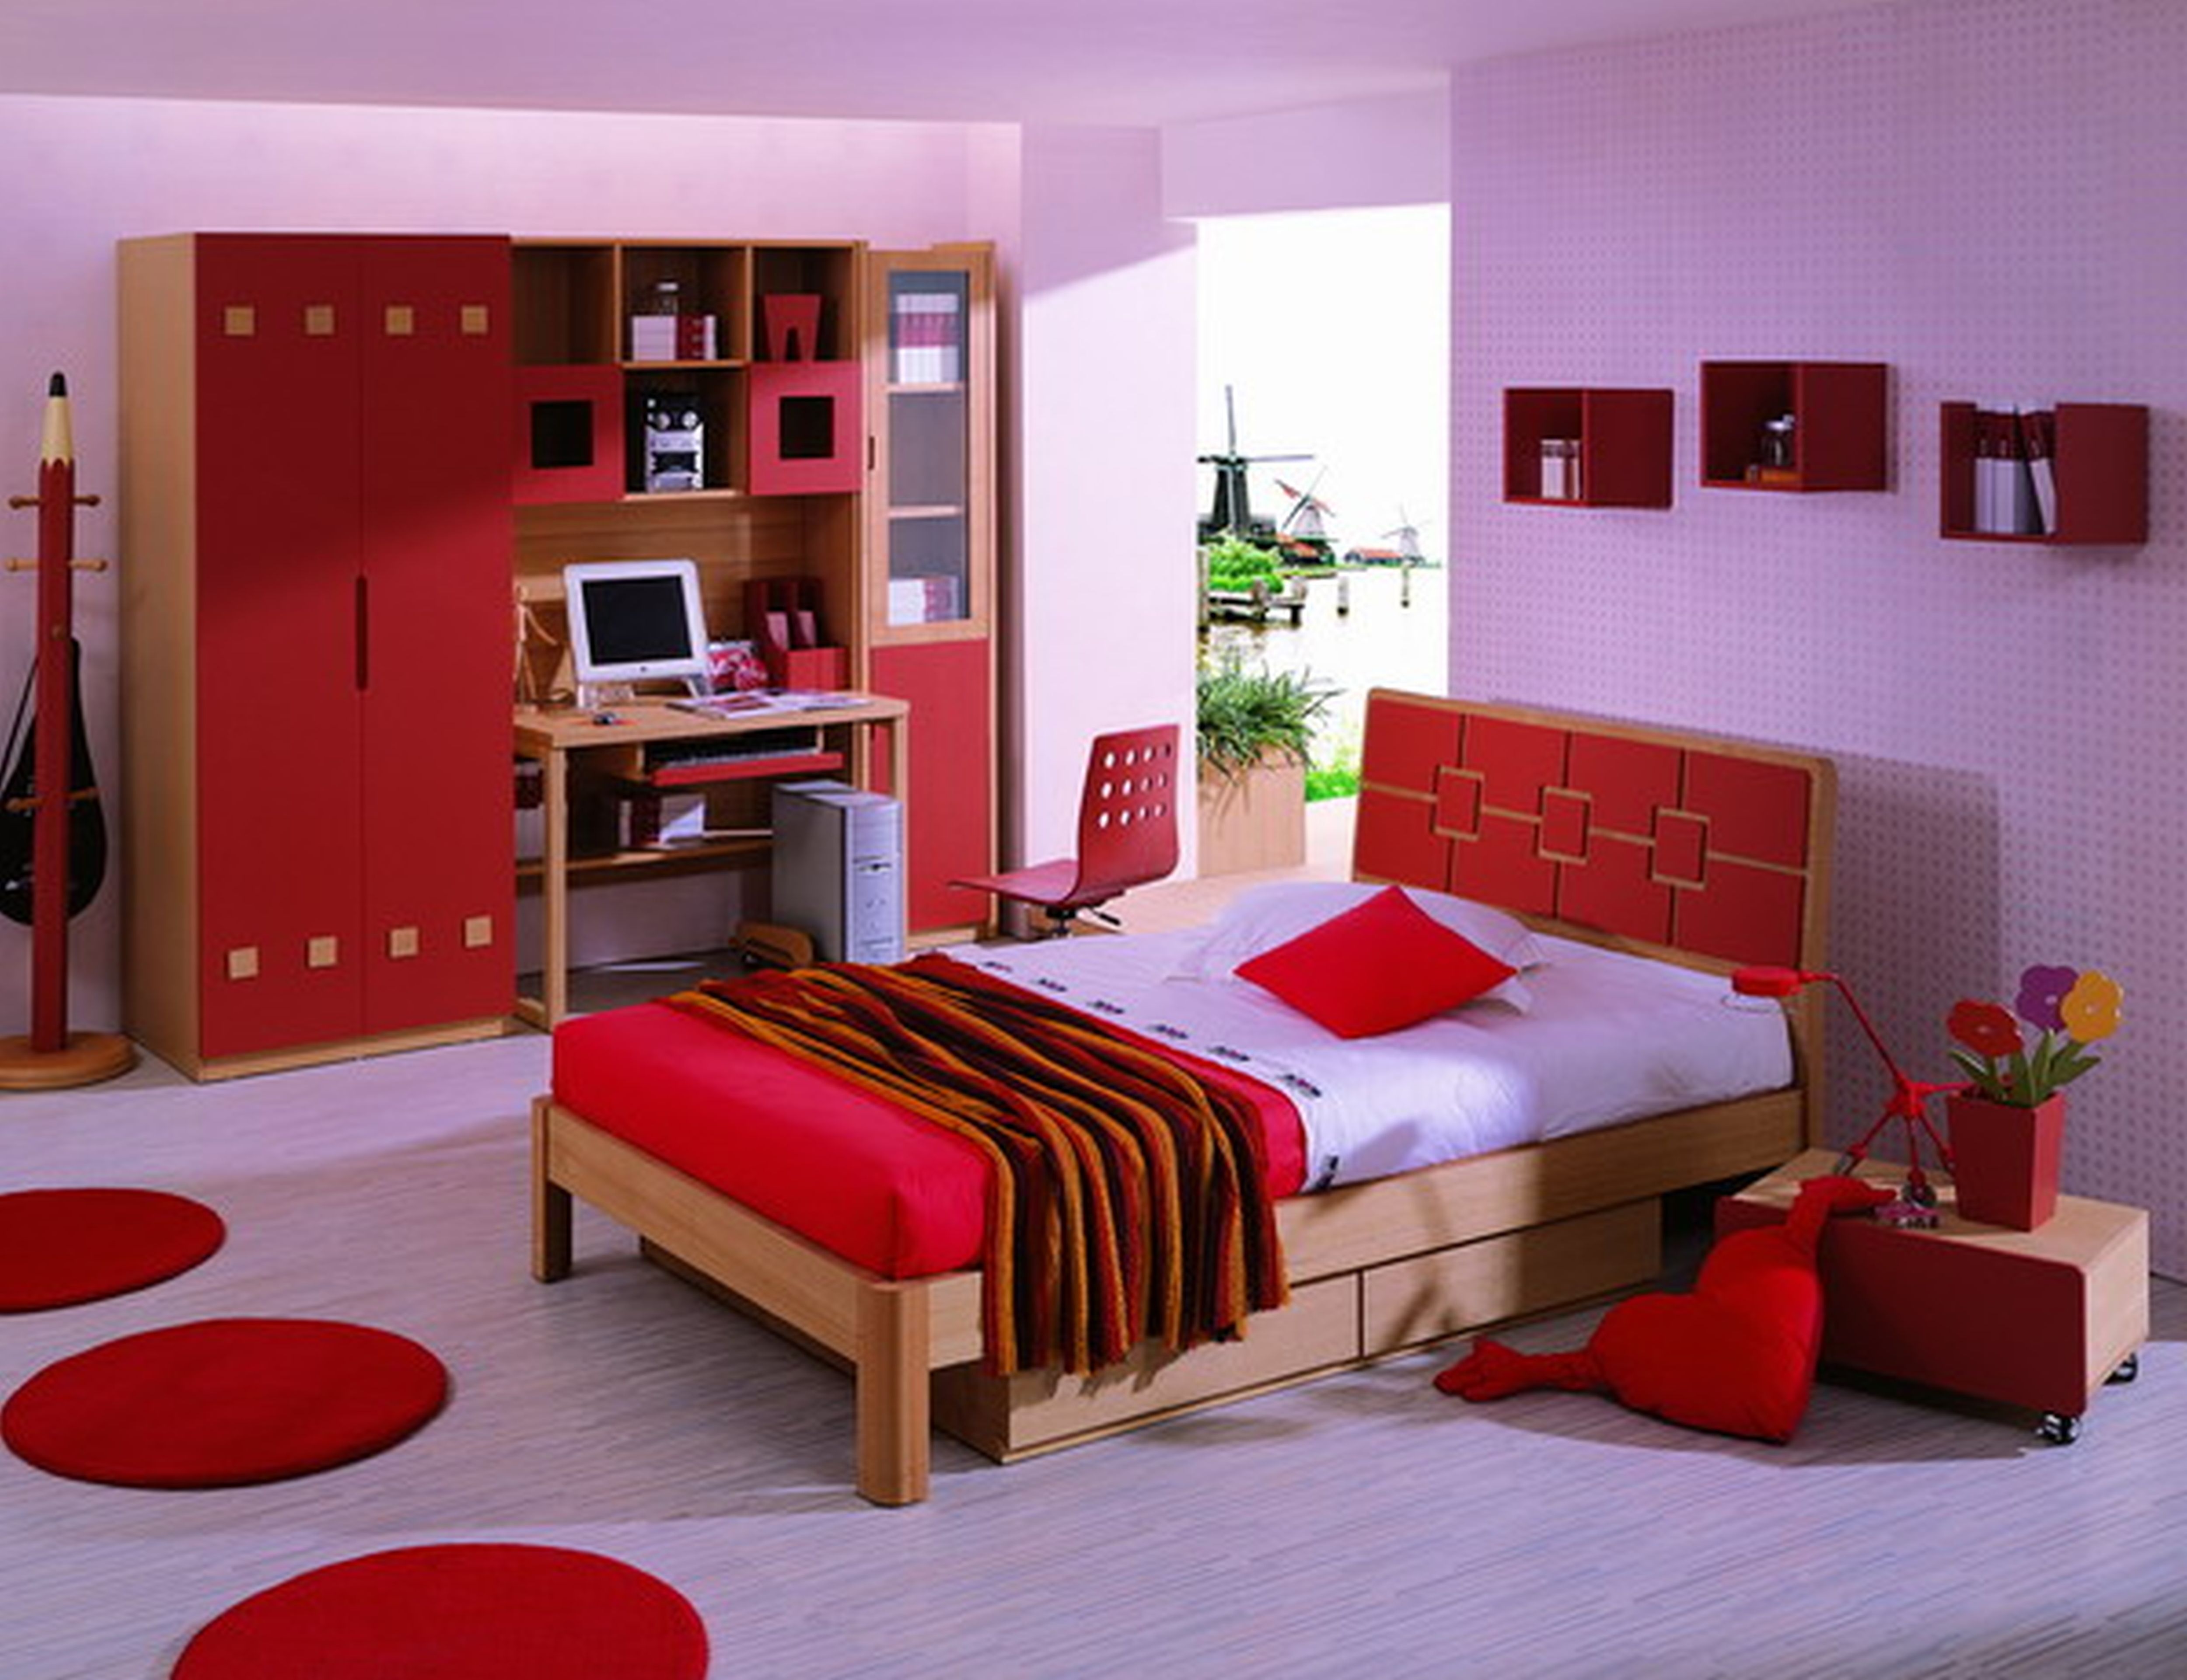 Red And Purple Bedroom Decorpad